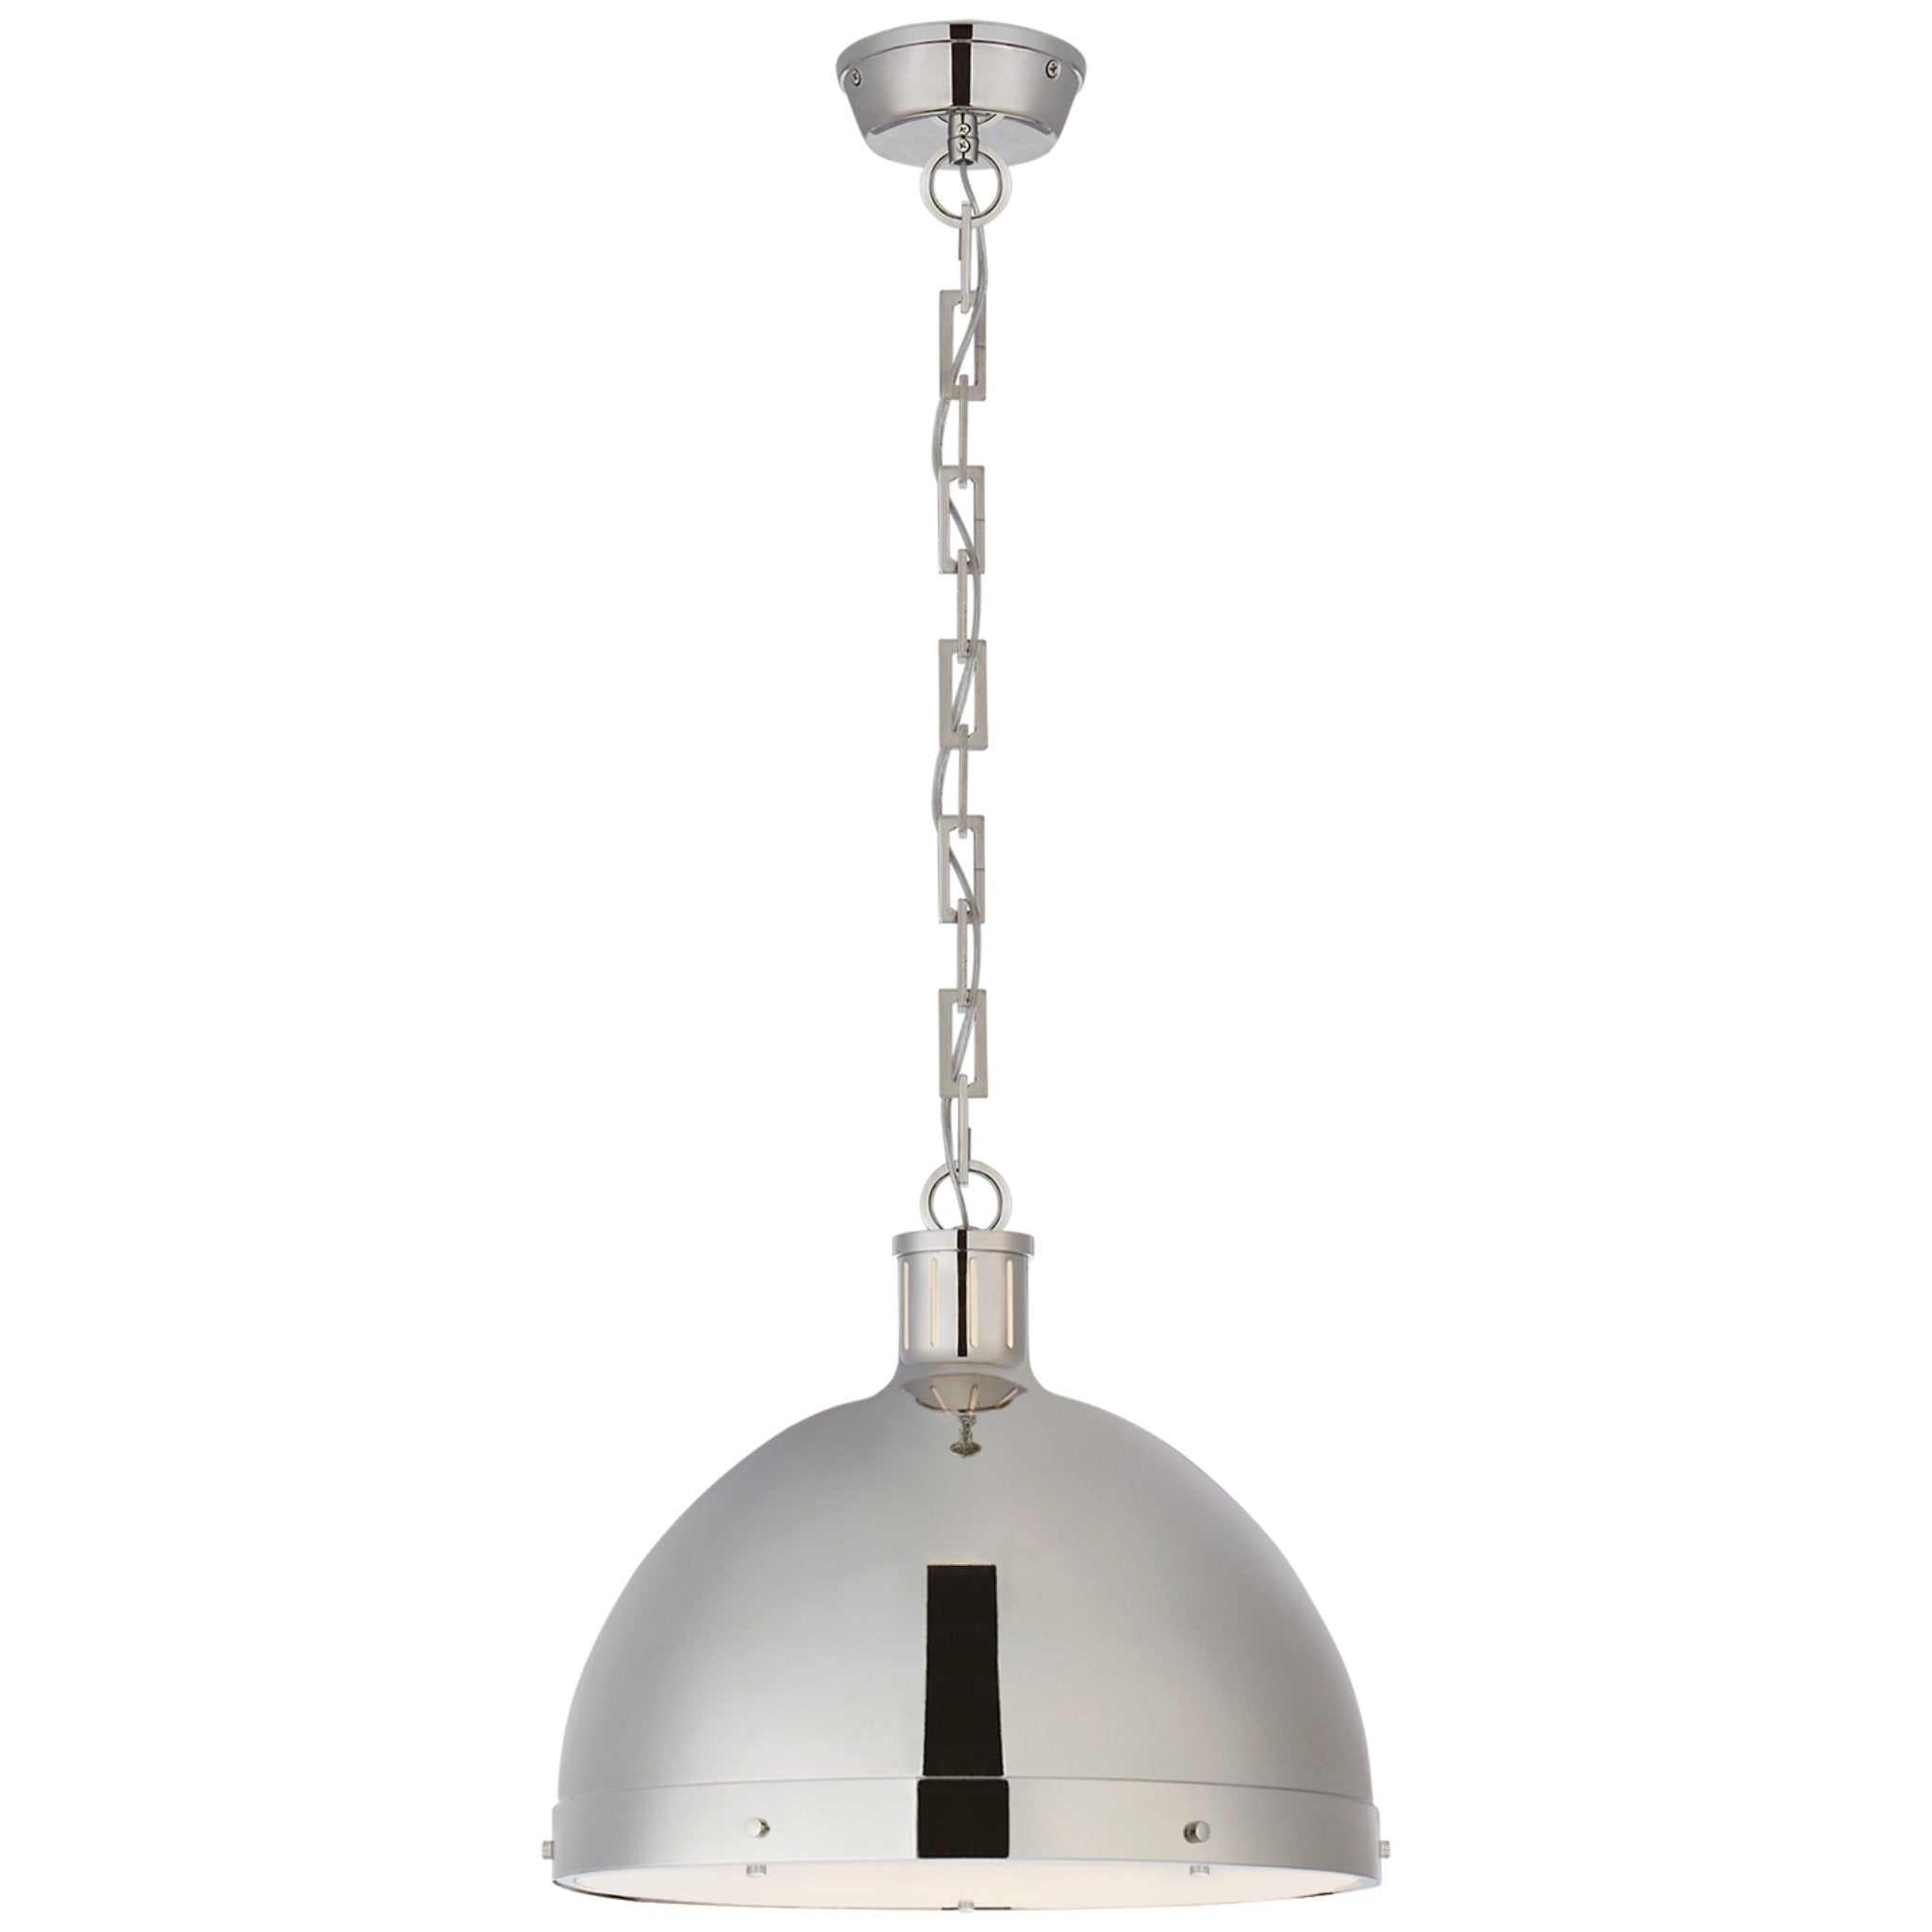 Thomas O'Brien Hicks Extra Large Pendant in Polished Nickel with Acrylic Diffuser